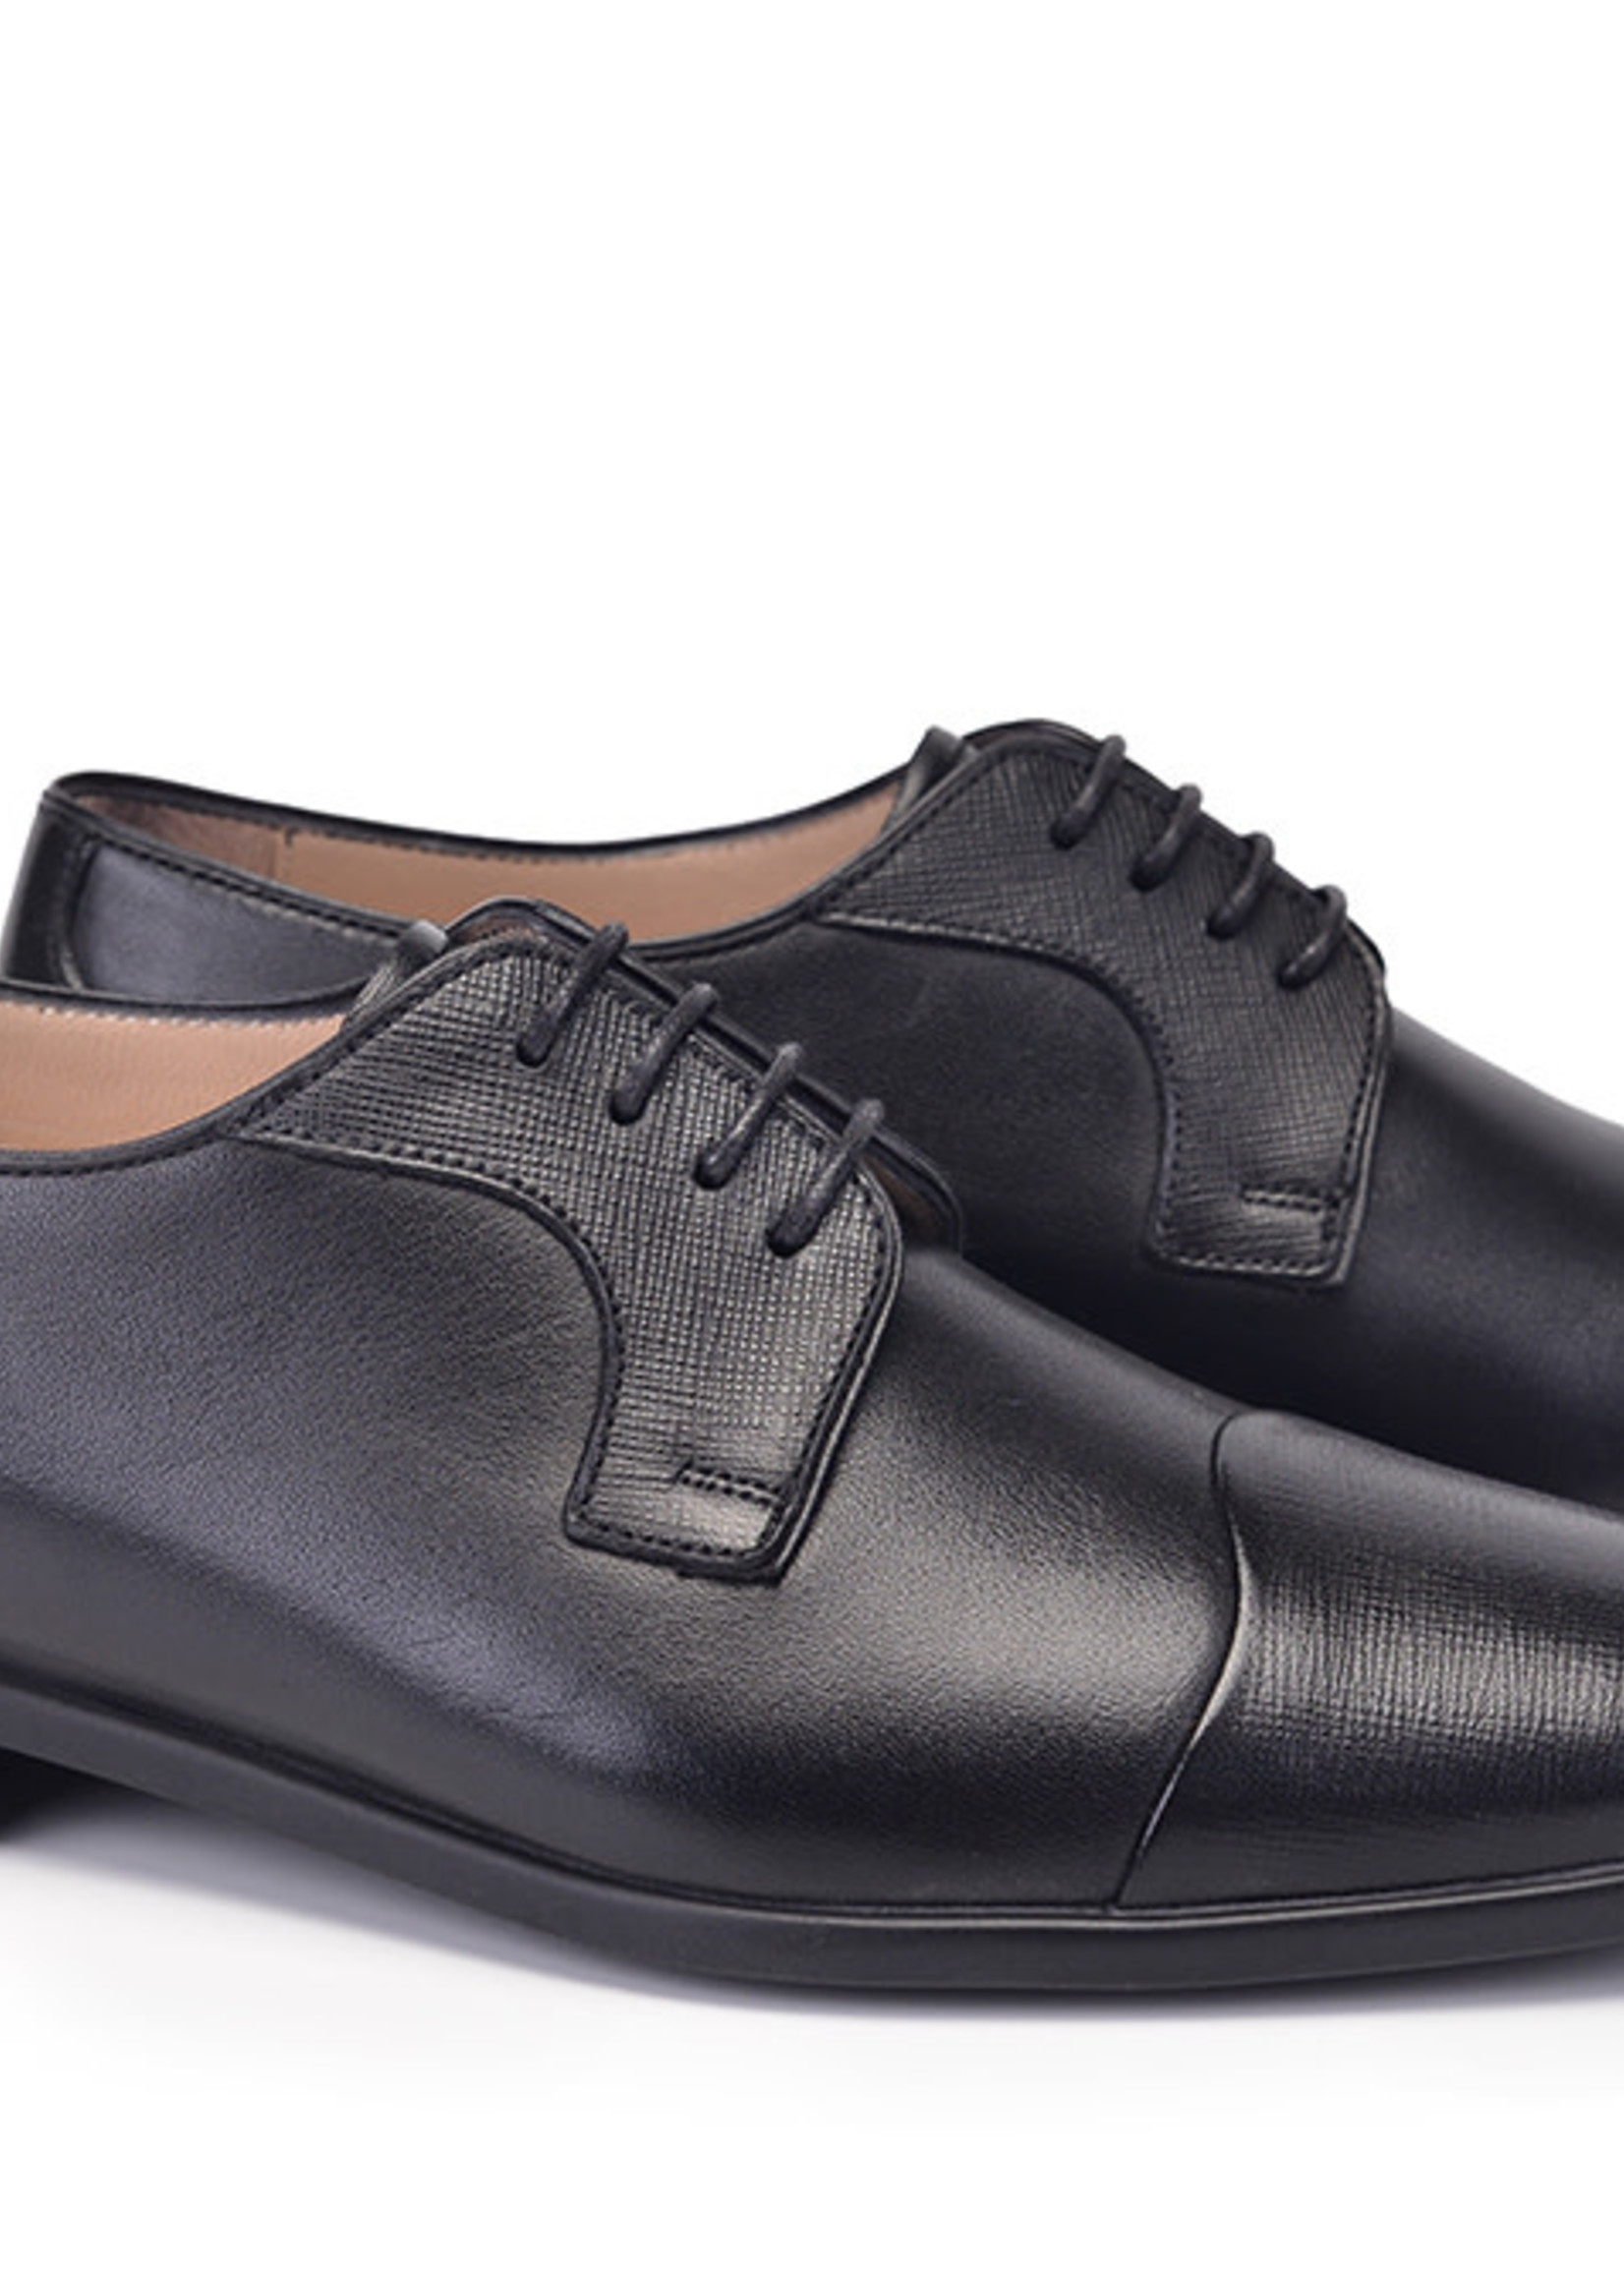 Leather wavy Cap Toe Derby Dress Shoe With Smooth Napa rubber sole tie shoe